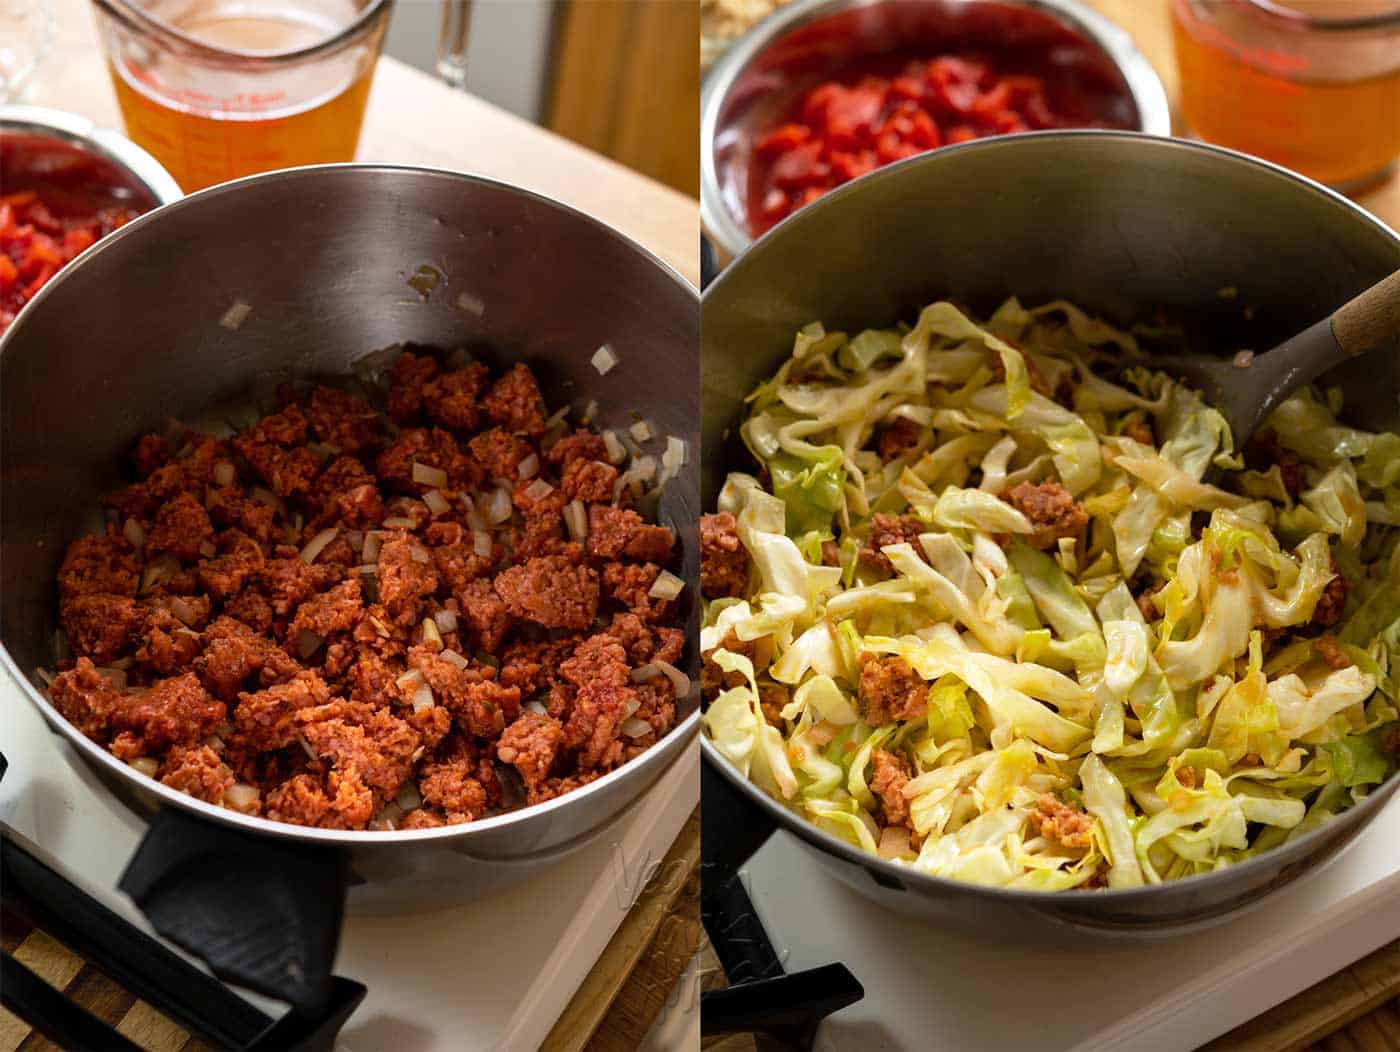 Image collage of sautéing onions with vegan meat, and cabbage